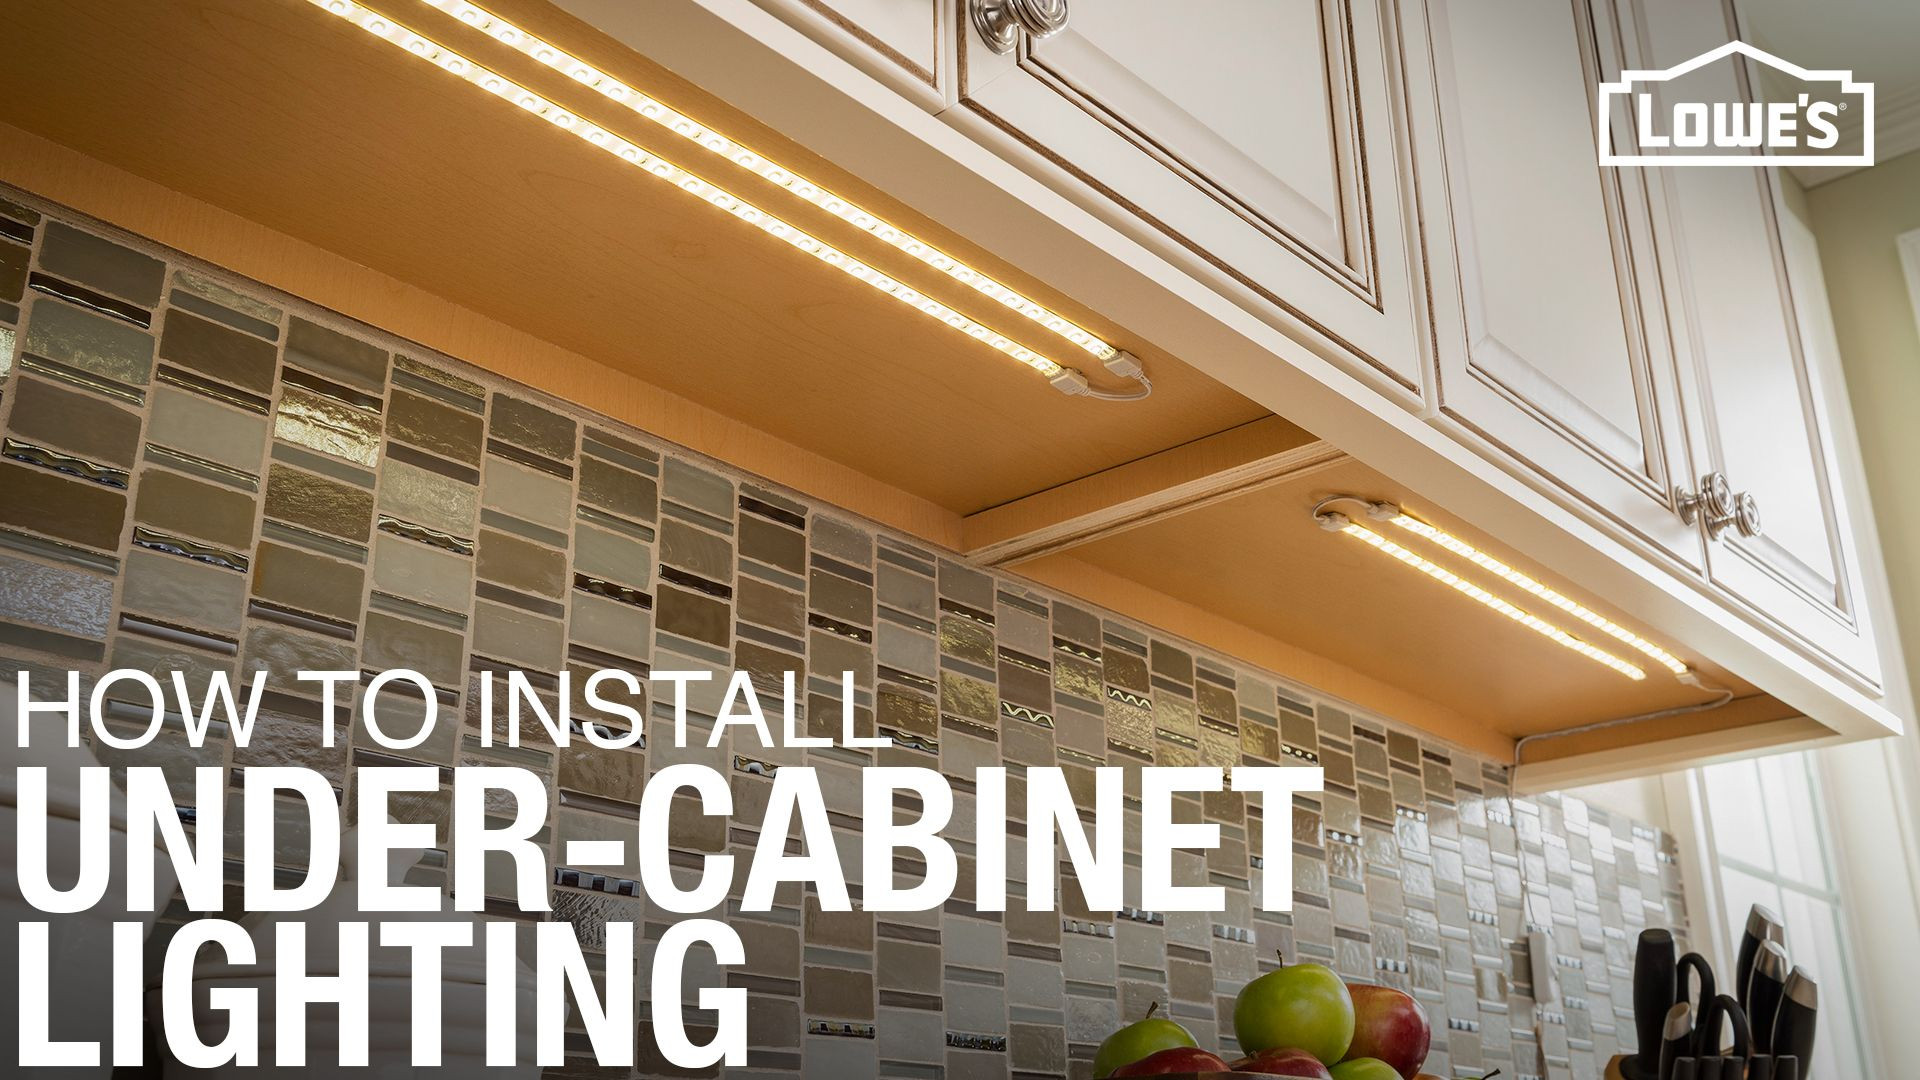 Under Cabinet Kitchen Lighting Options
 How to Install Under Cabinet Lighting